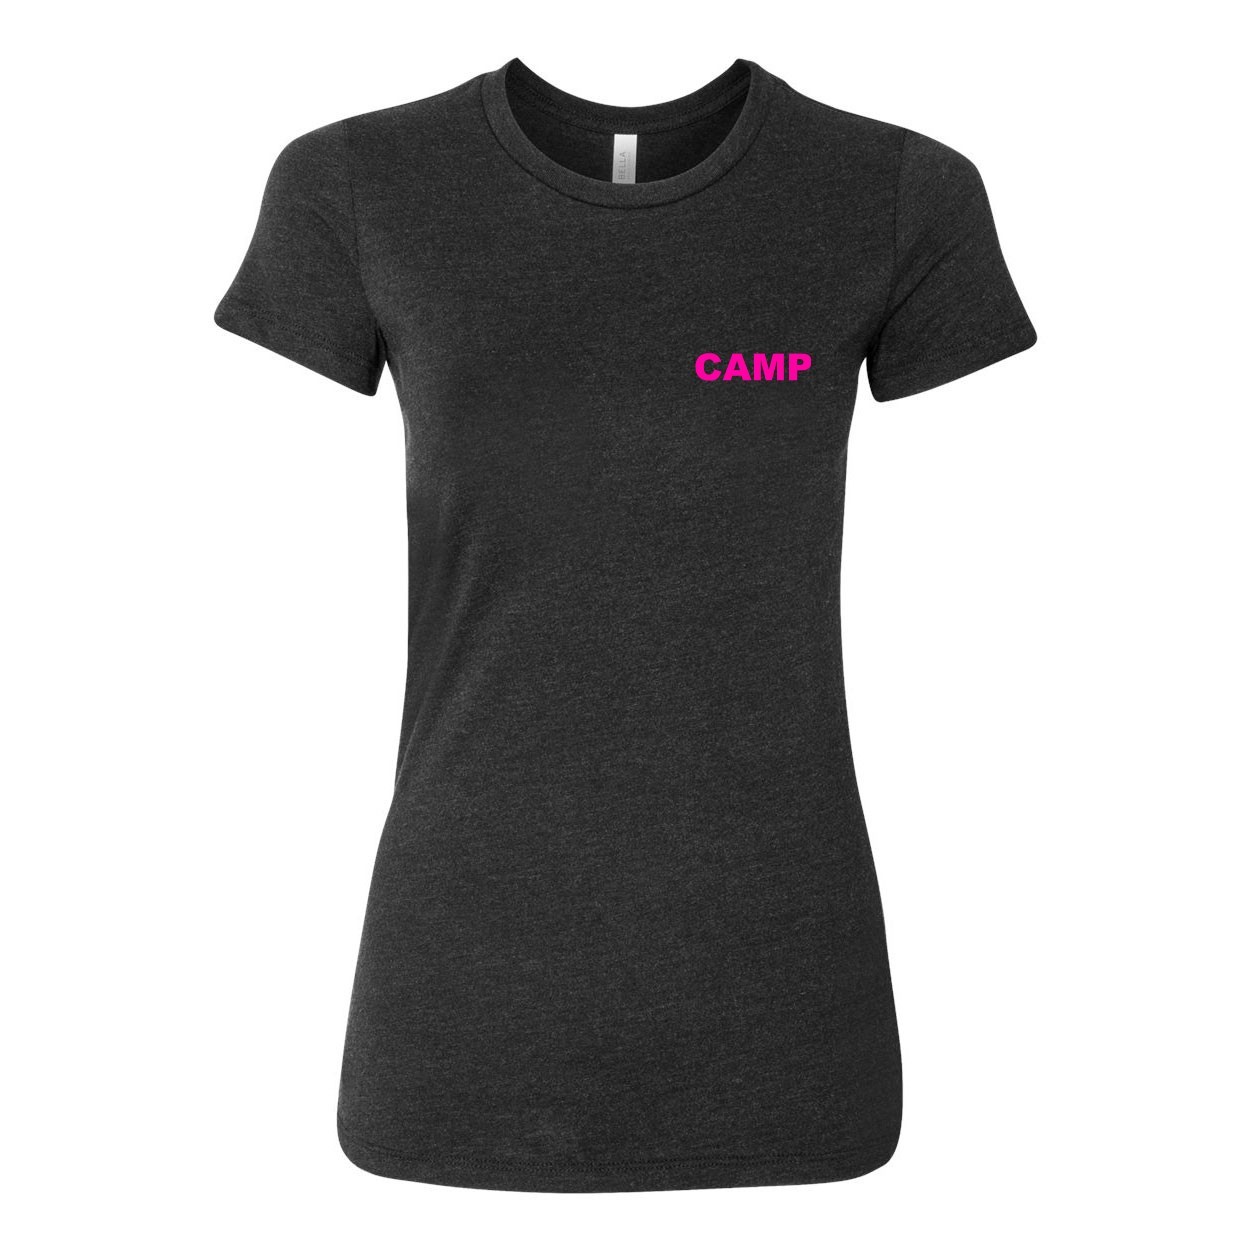 Camp Brand Logo Night Out Womens Fitted T-Shirt Dark Heather Gray (Pink Logo)